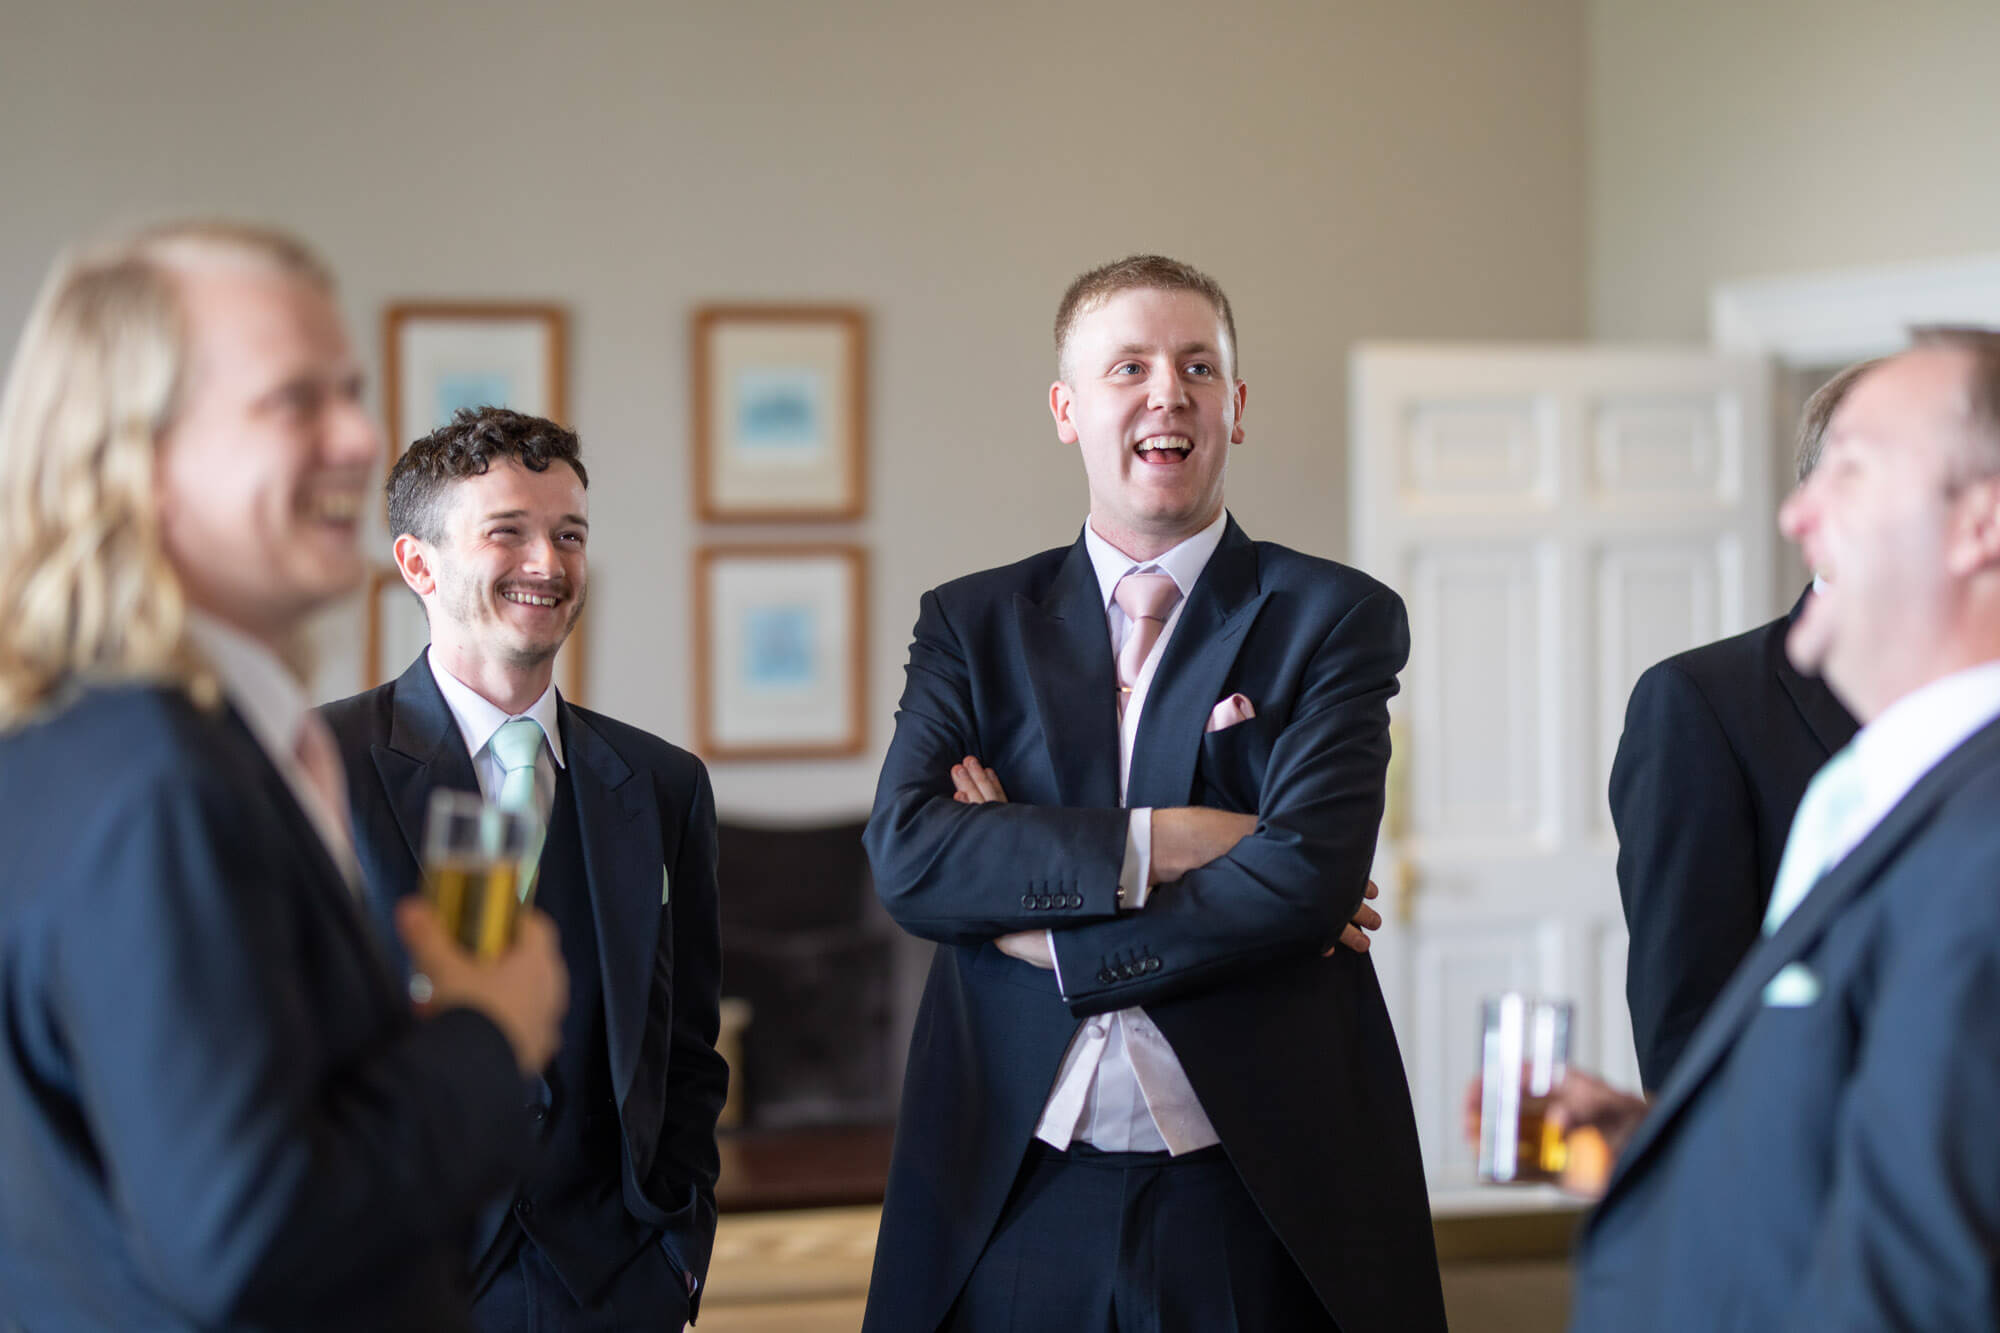 The groom and his groomsmen are all laughing as they watch a screen and enjoy a beer